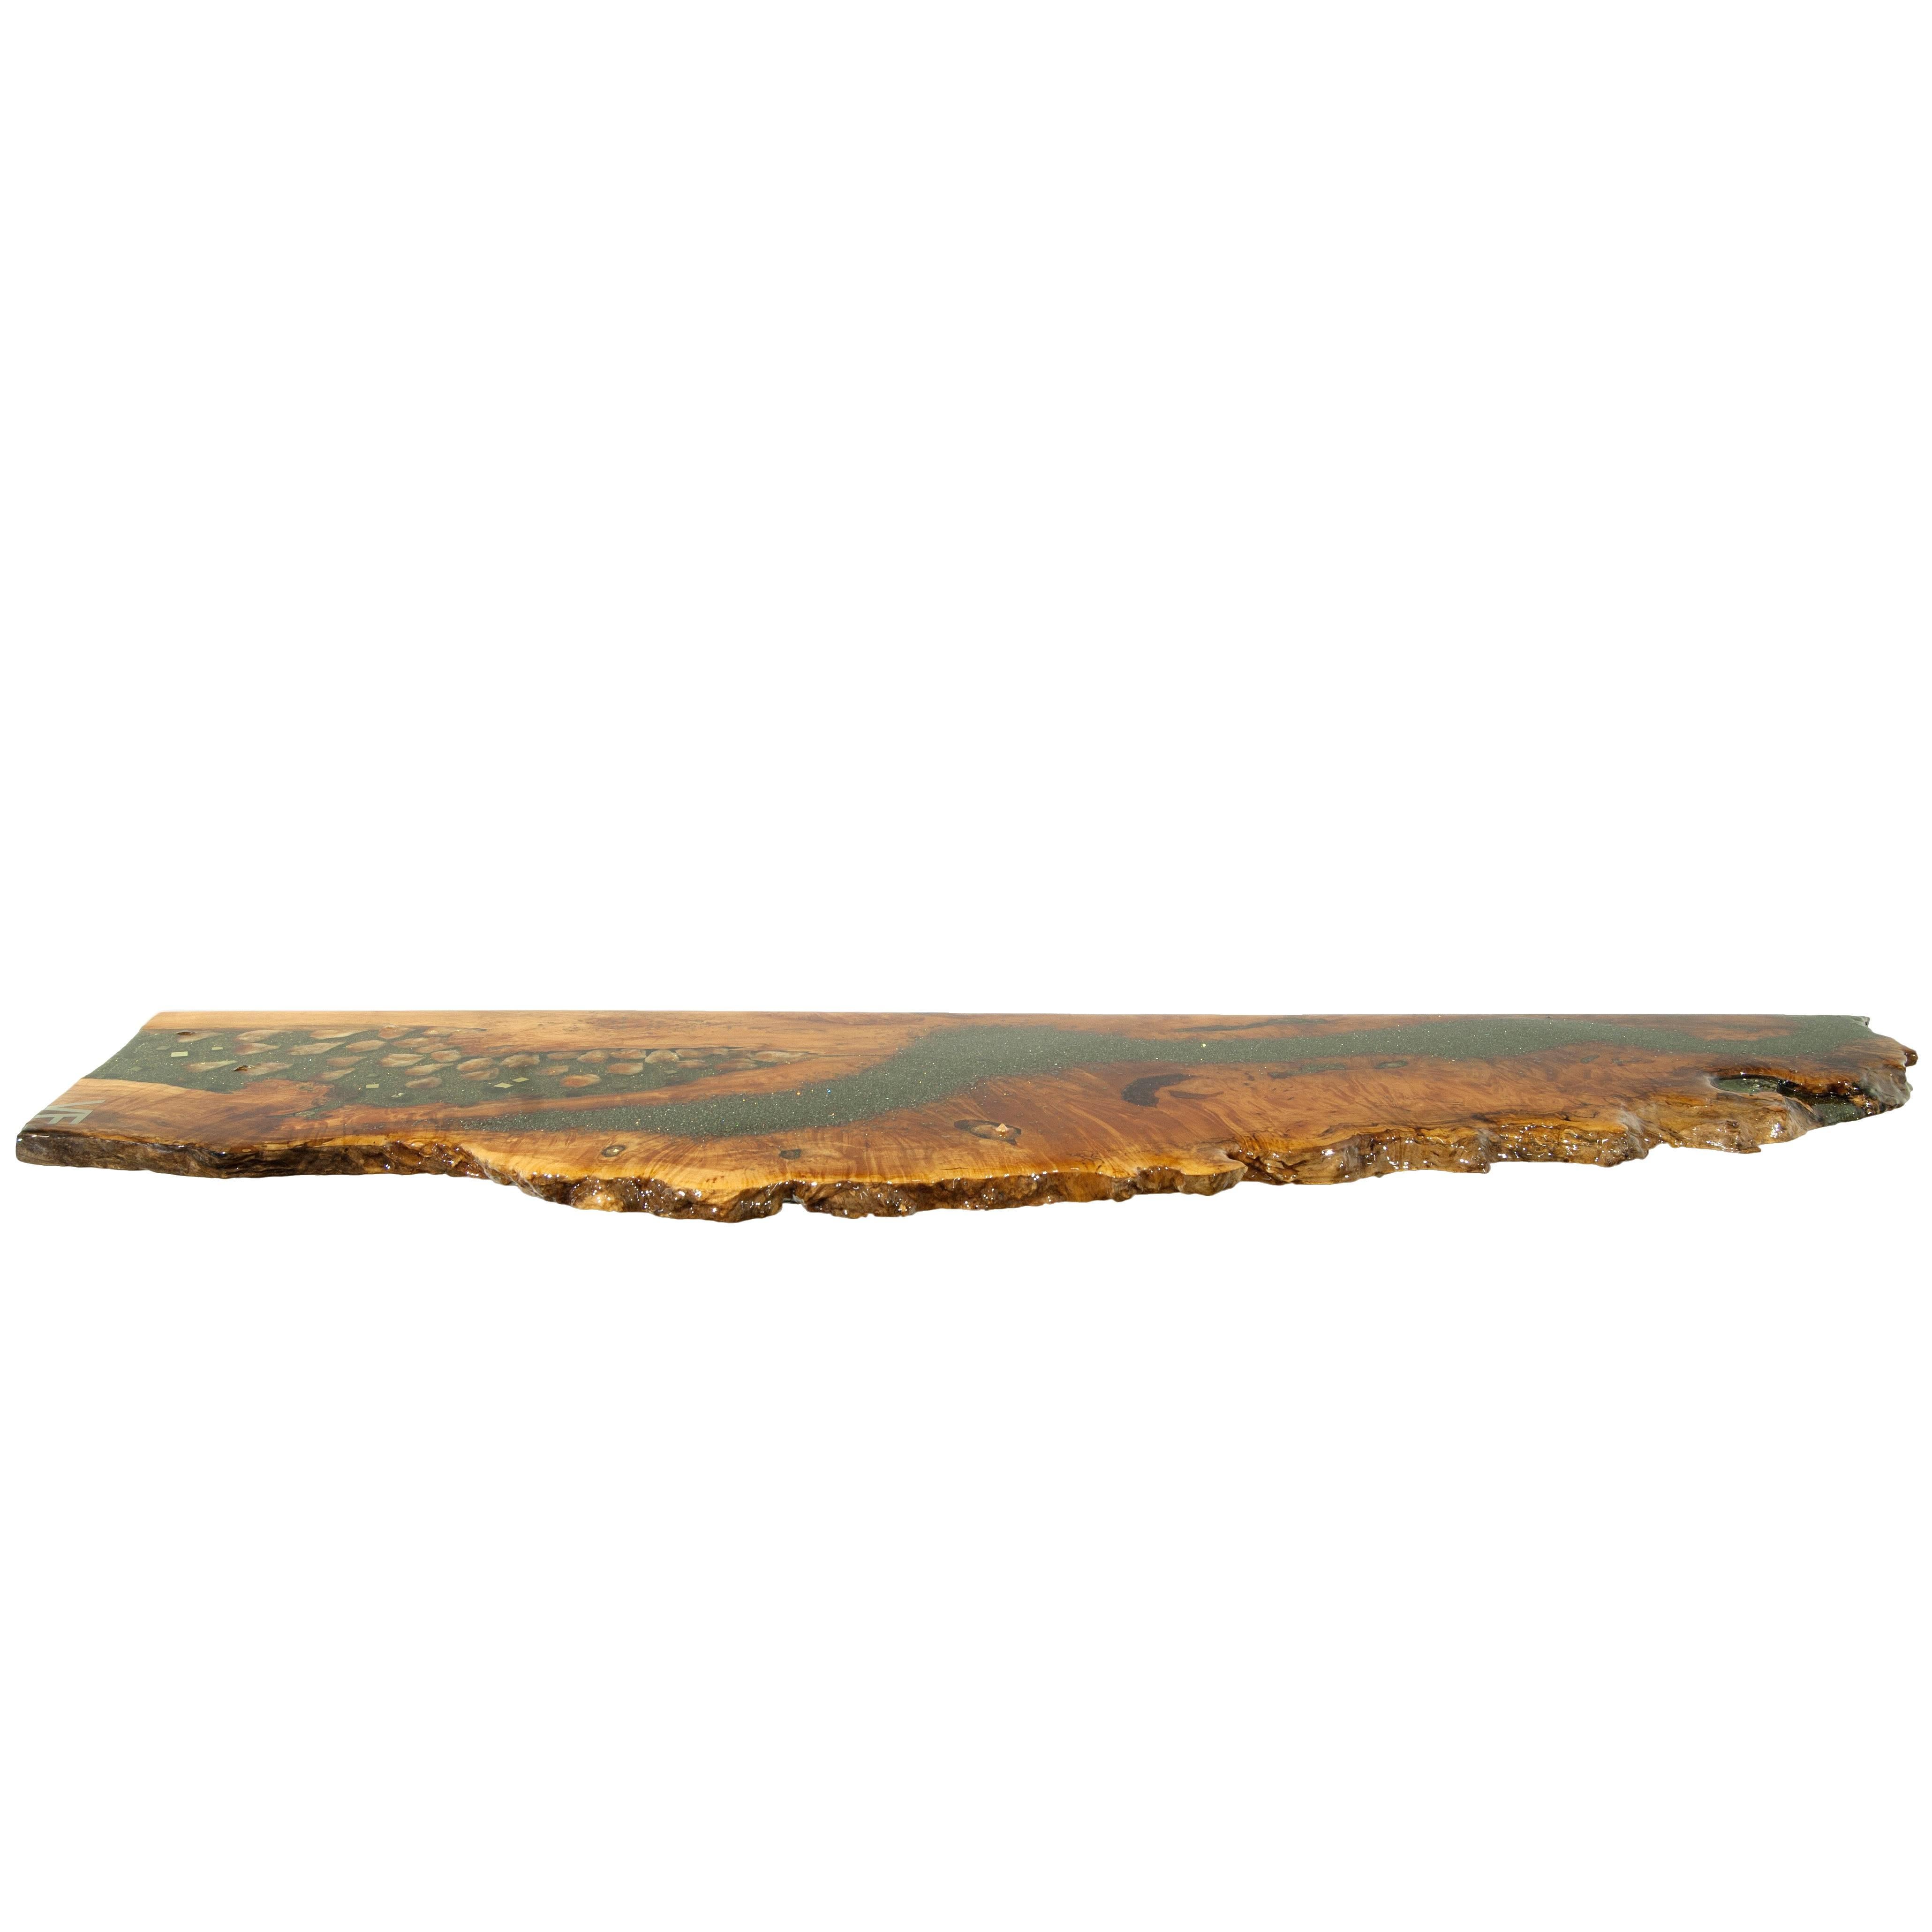 This stunning shelf in Big Leaf Burl Maple with crystal and gemstone inlay and a high gloss finish is stunning on any wall or entryway. Inlays of: Citrine, Emerald, Peridot, Pyrite, Rubelite, Tangerine quartz and Yellow apatite make the surface